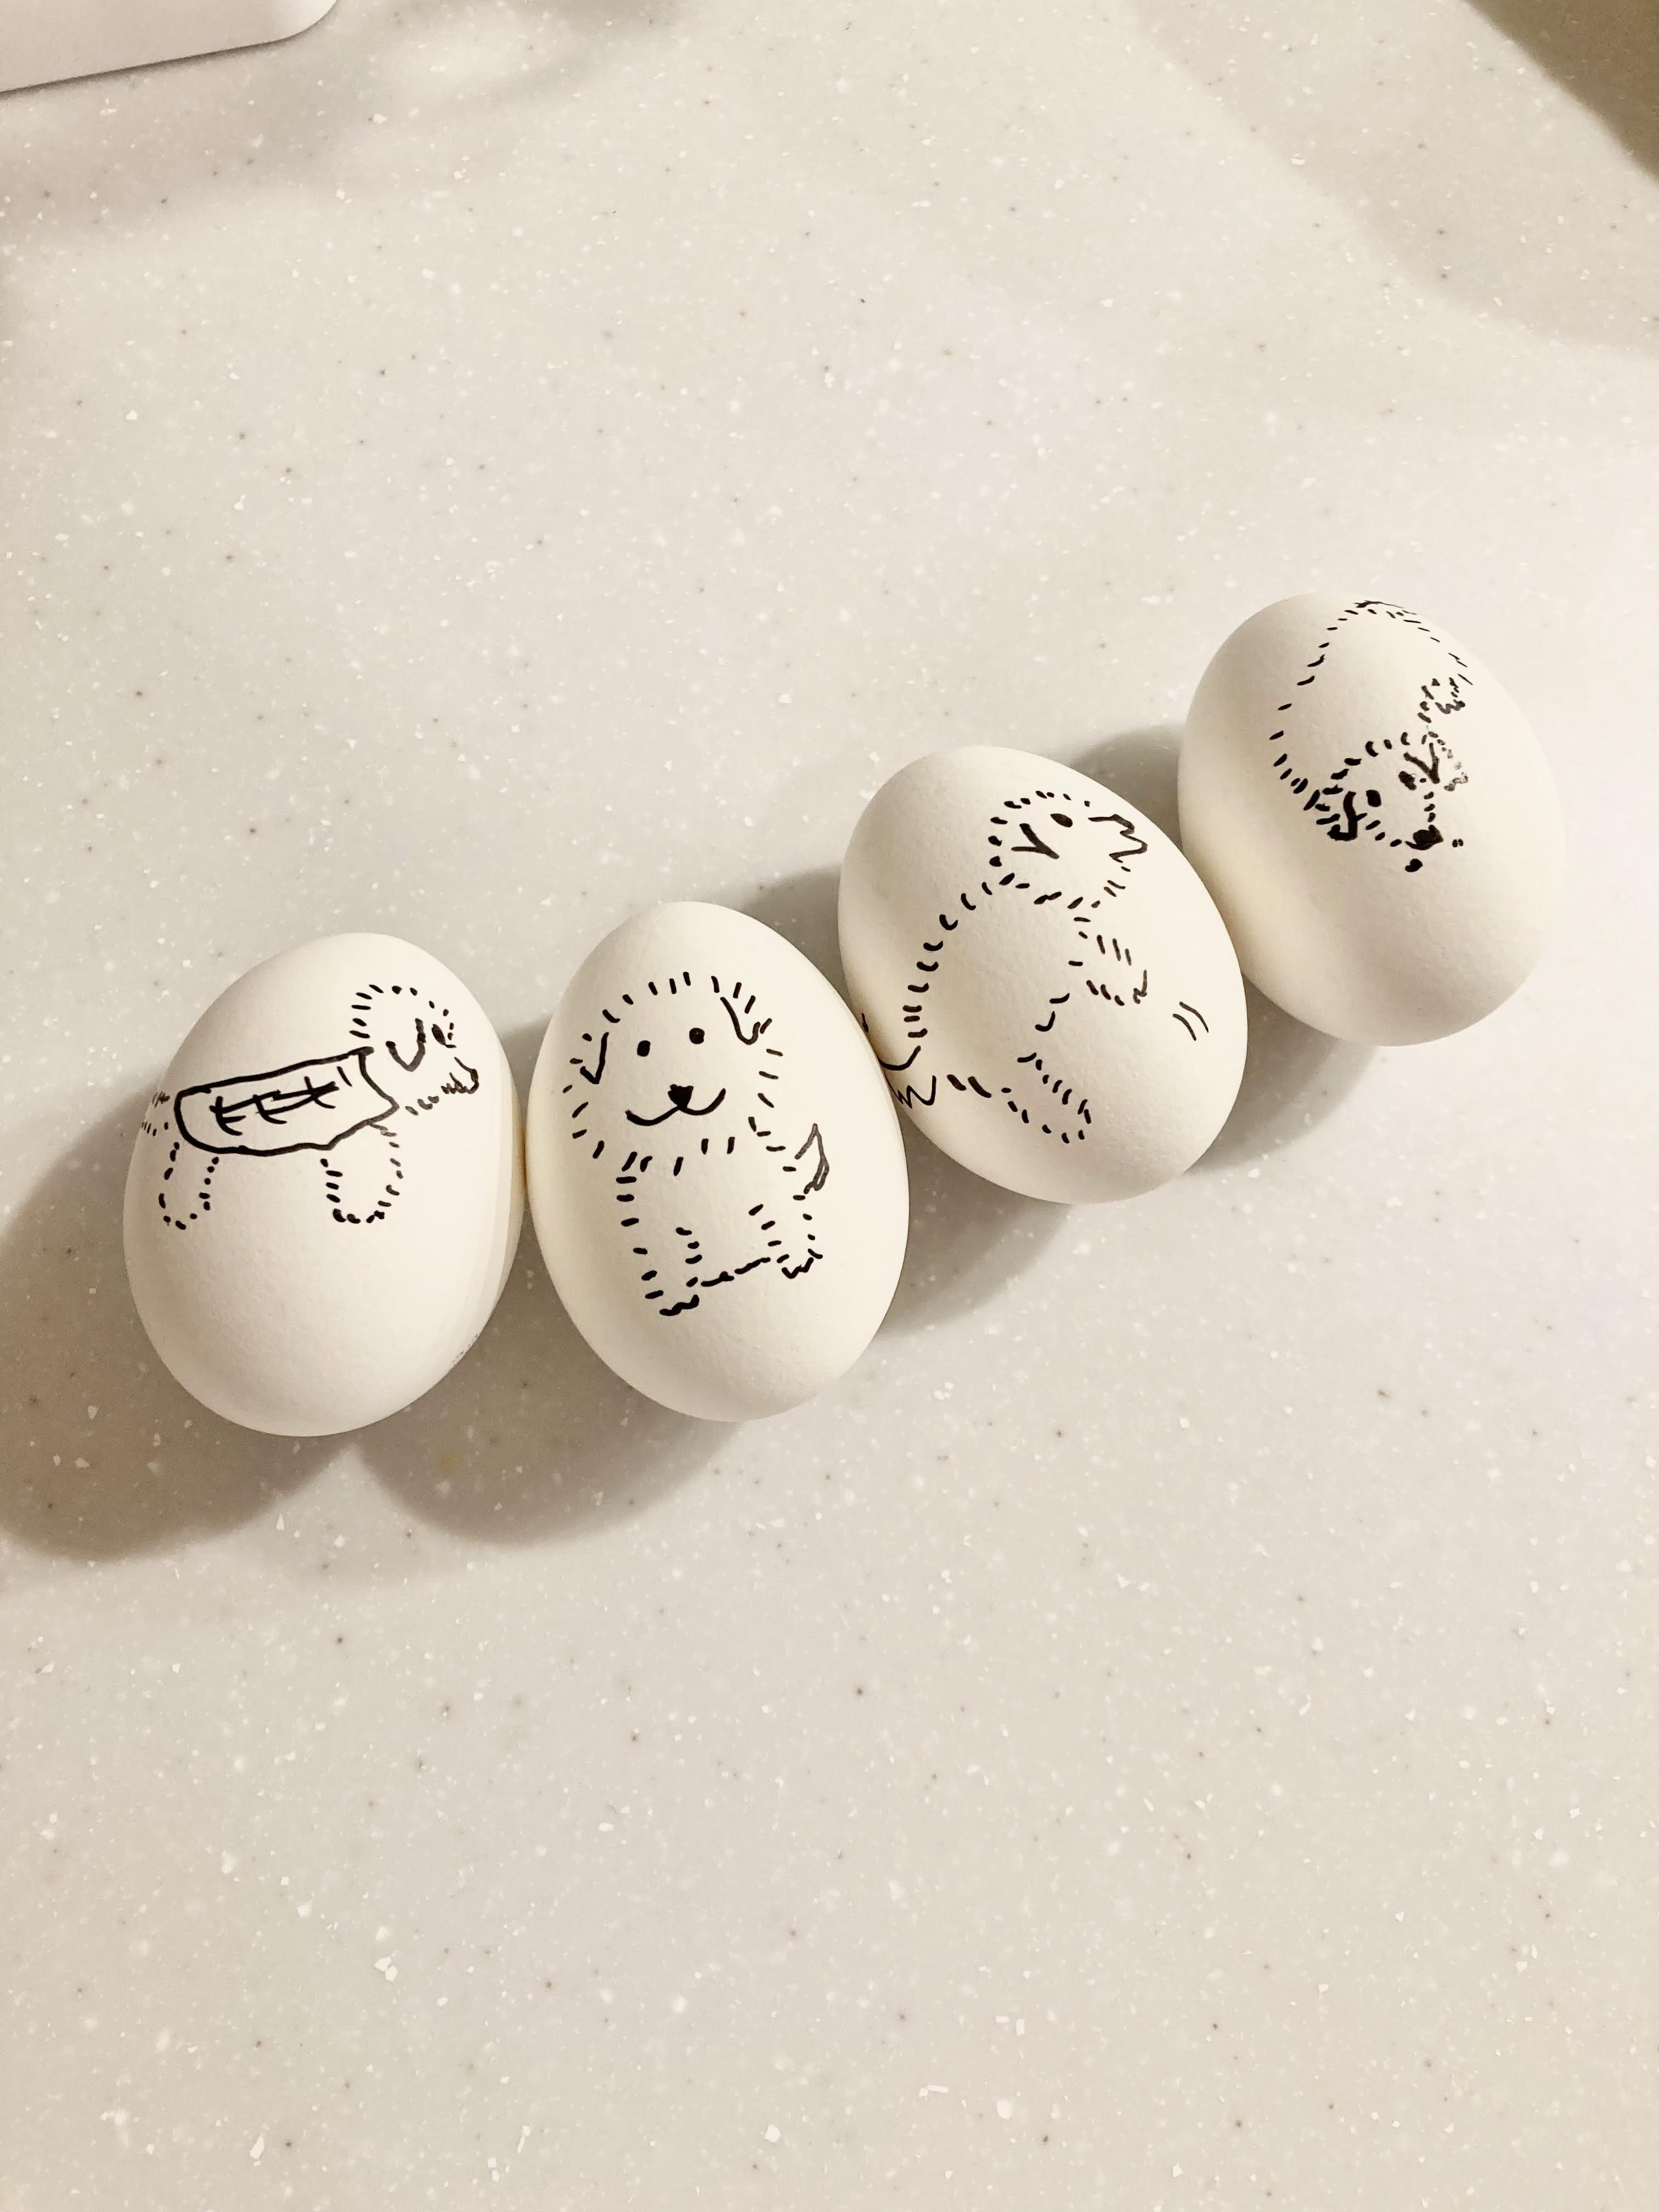 4 boiled eggs with pictures of a puppy drawn on them